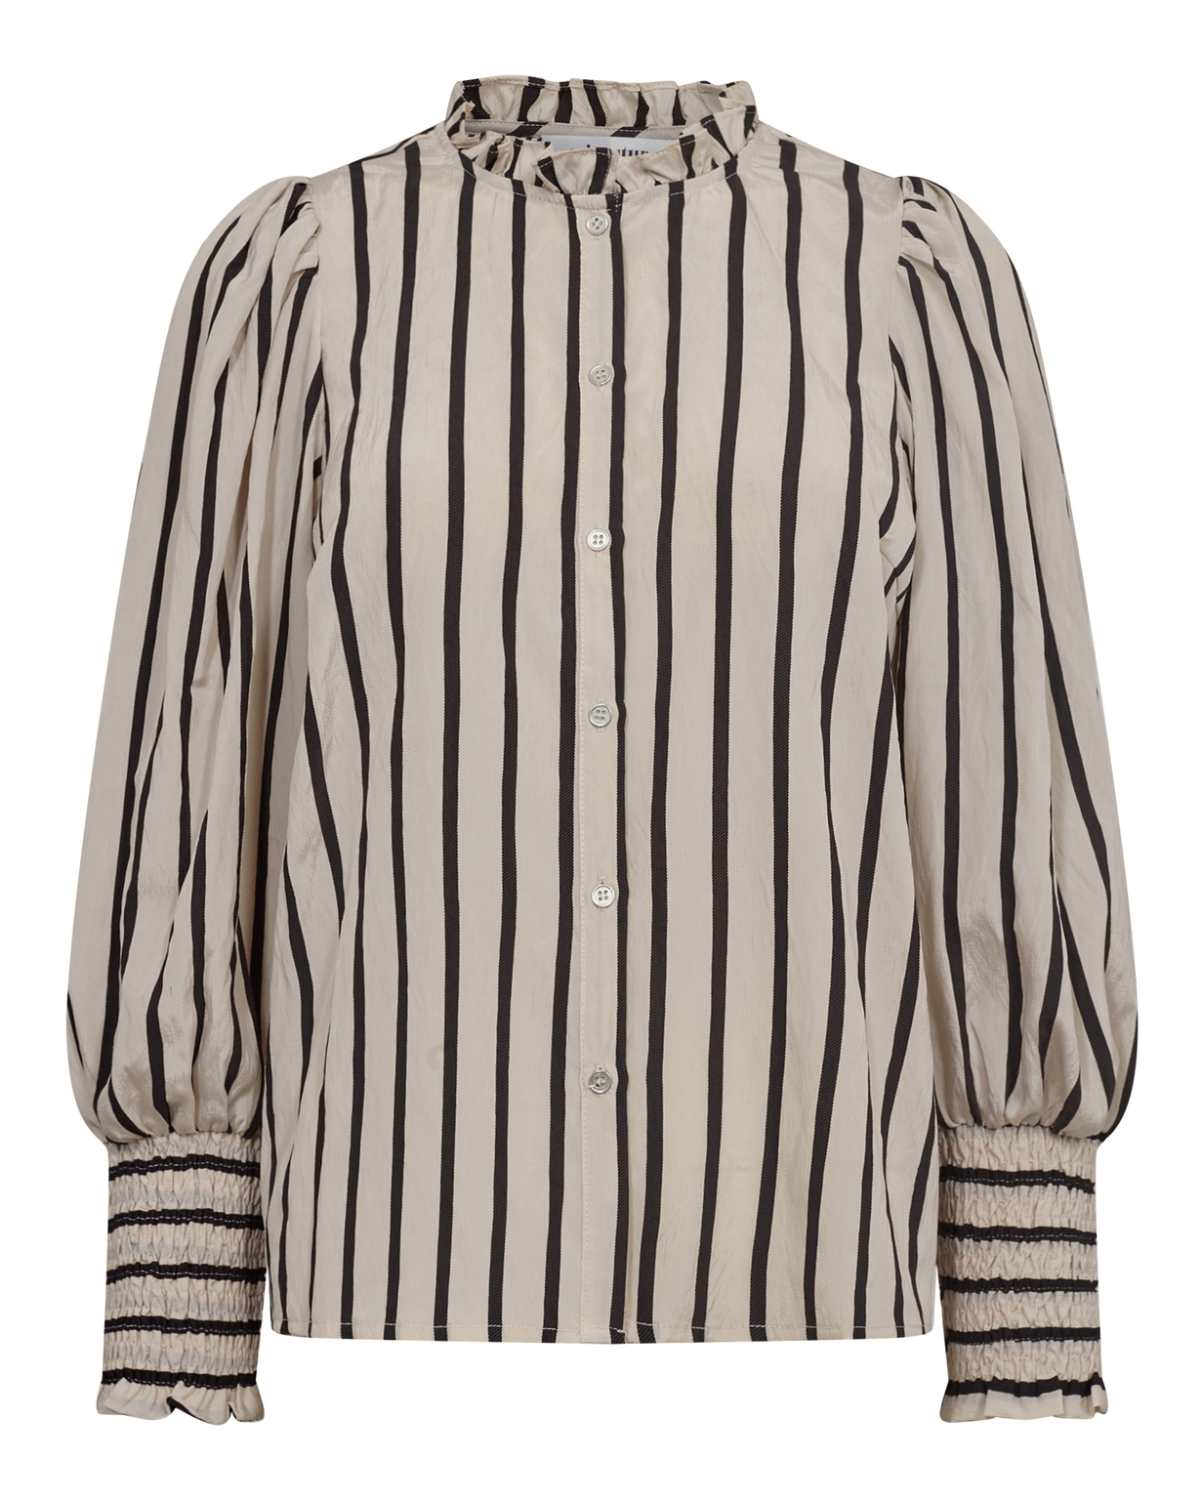 Sadie Frill Shirt Black/Beige - Co'couture